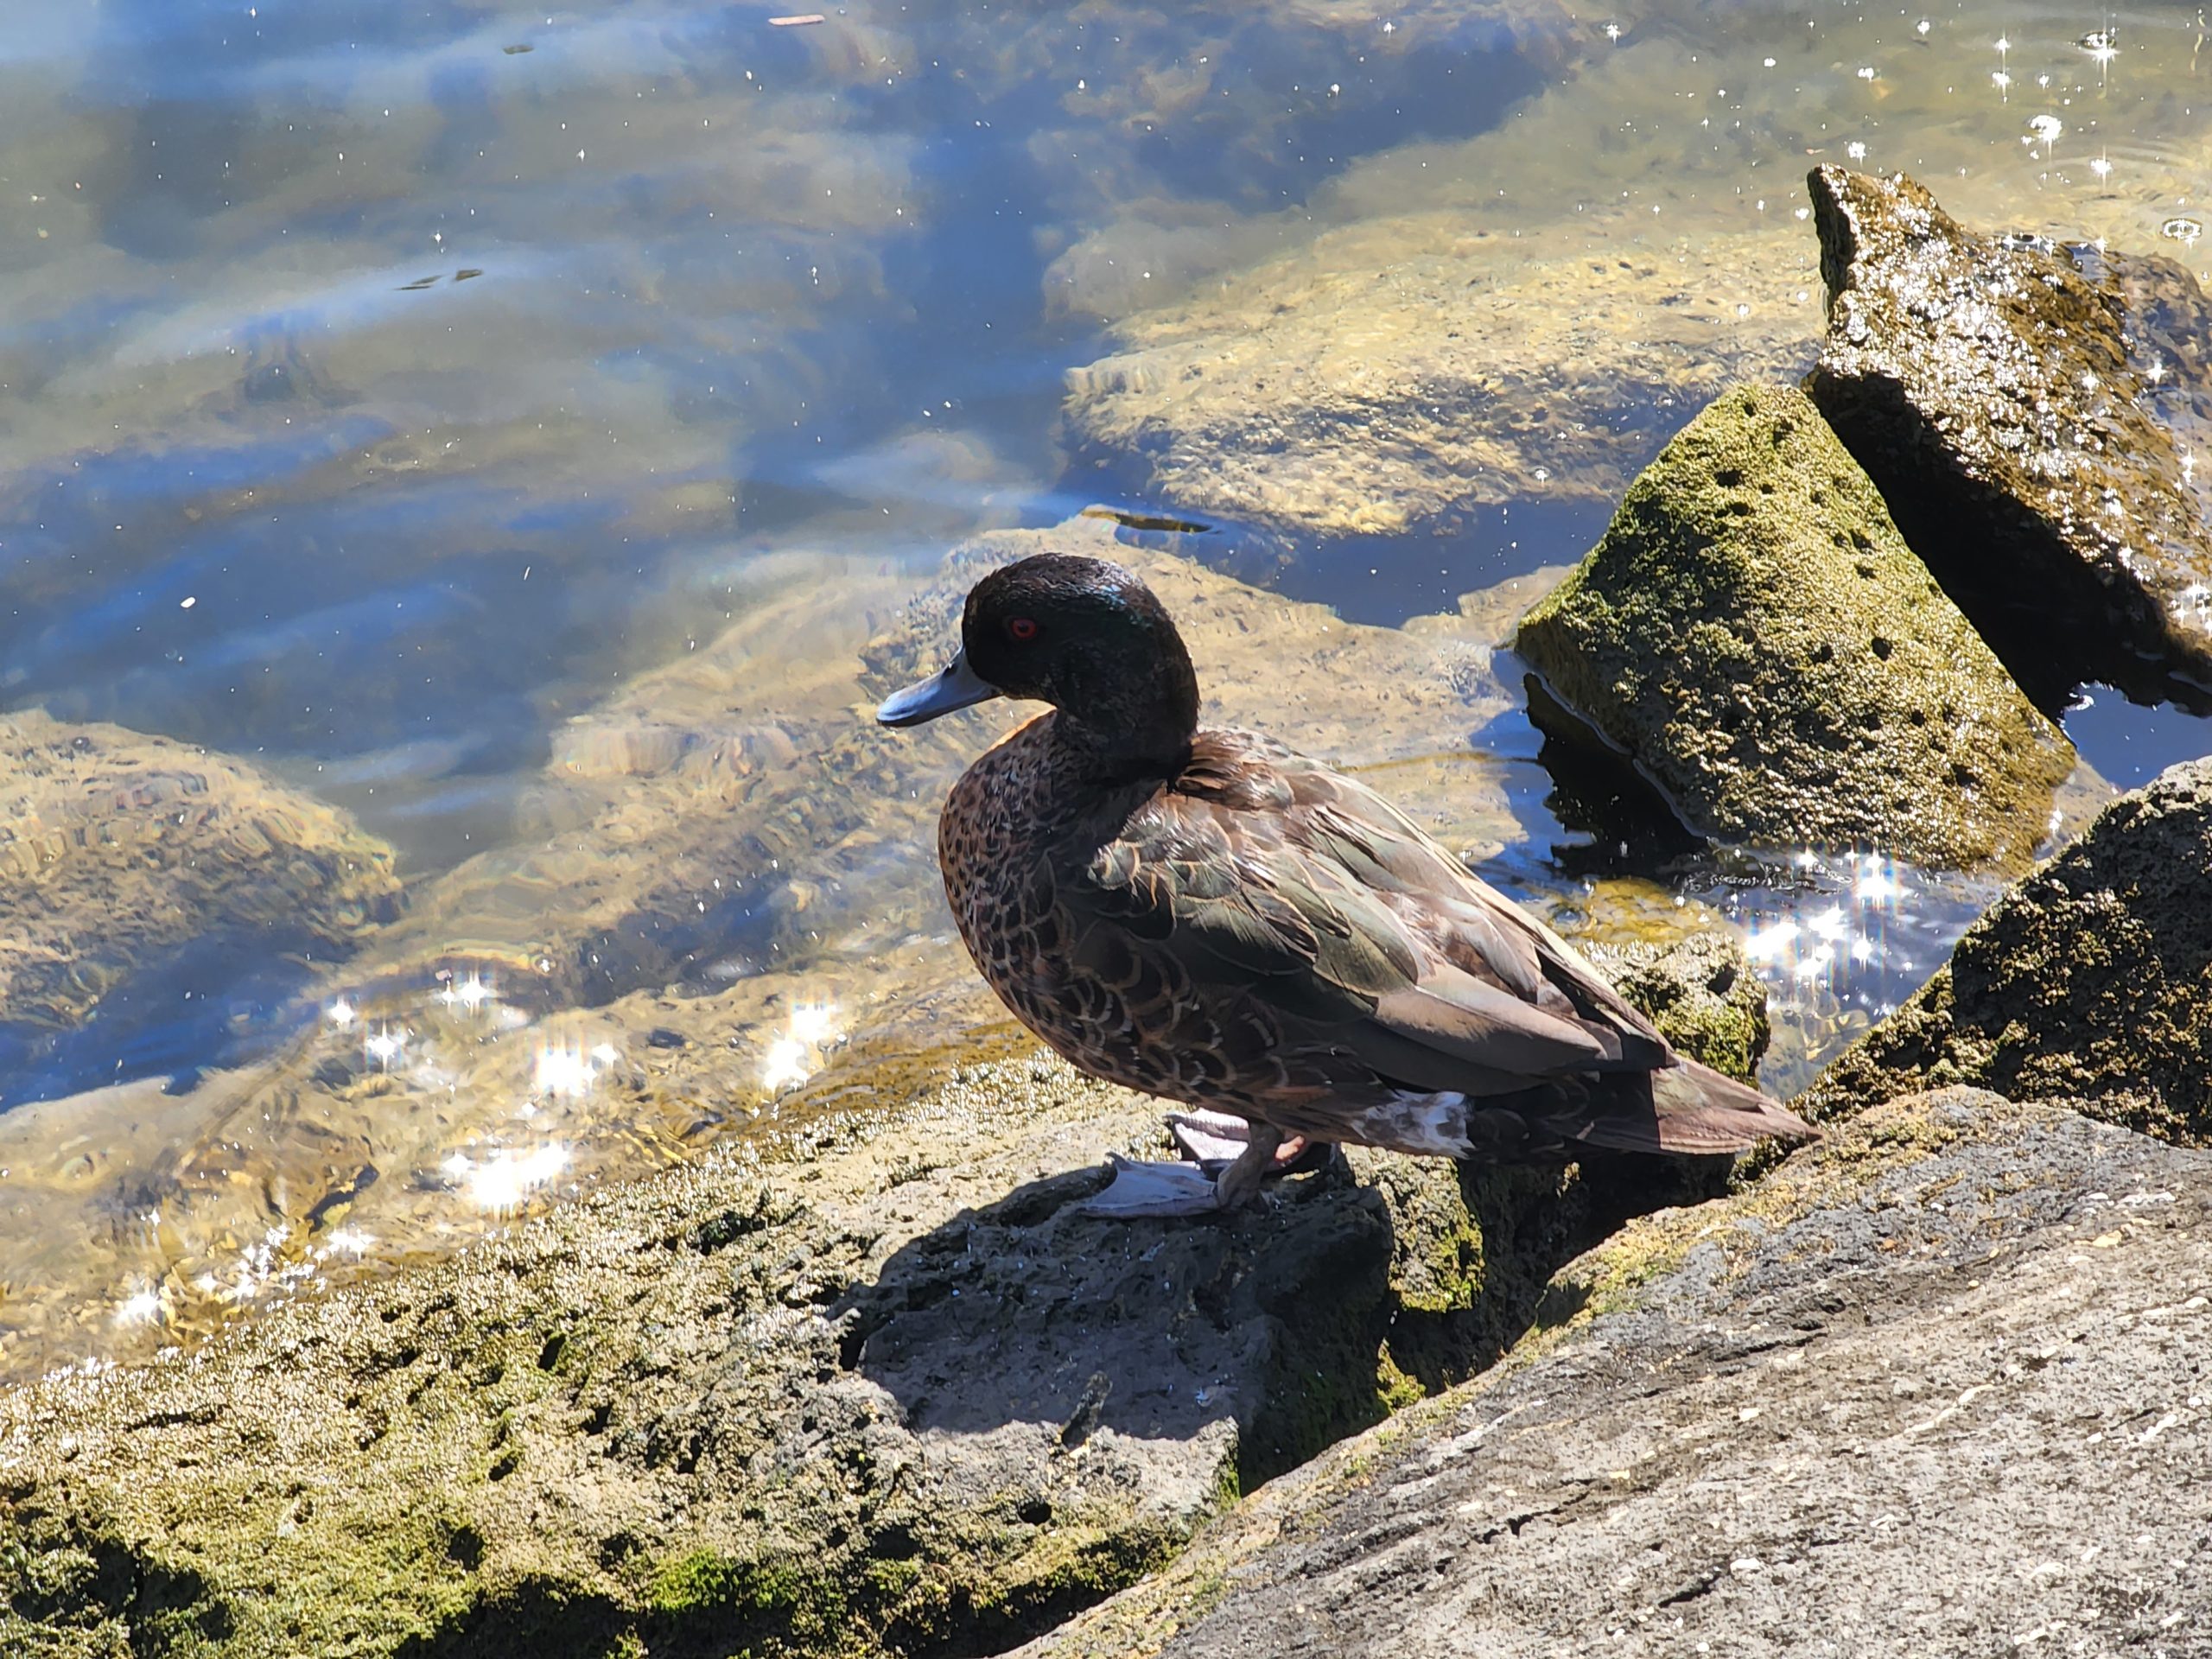 A duck stands on a rock near some glittering water